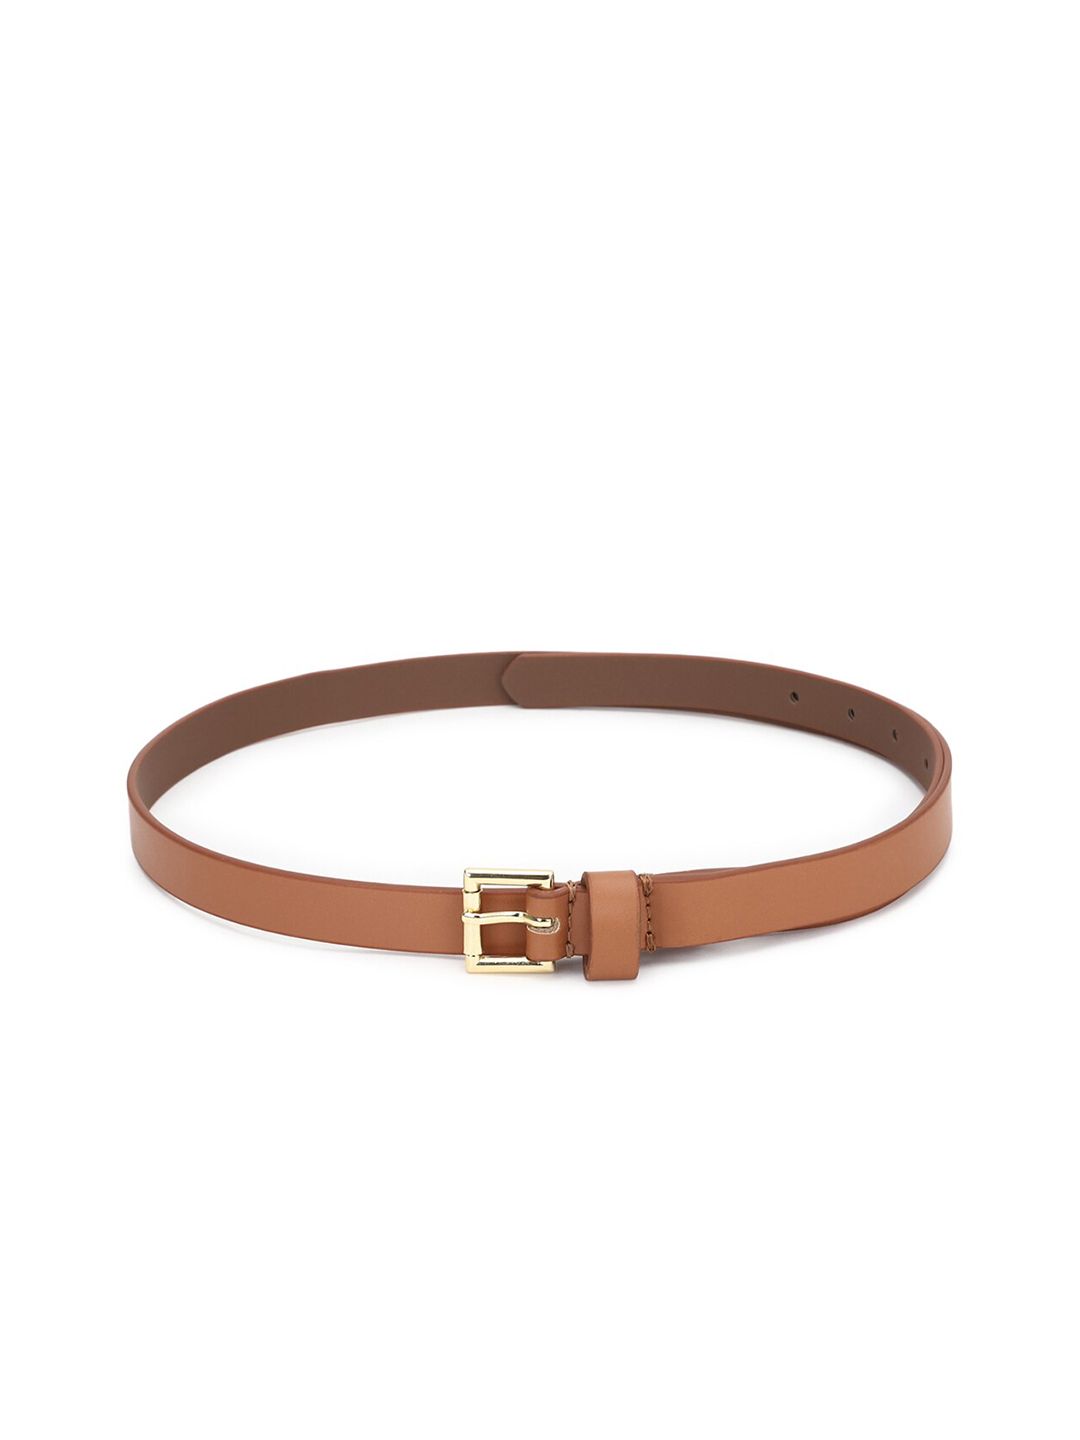 FOREVER 21 Women Brown Belt Price in India